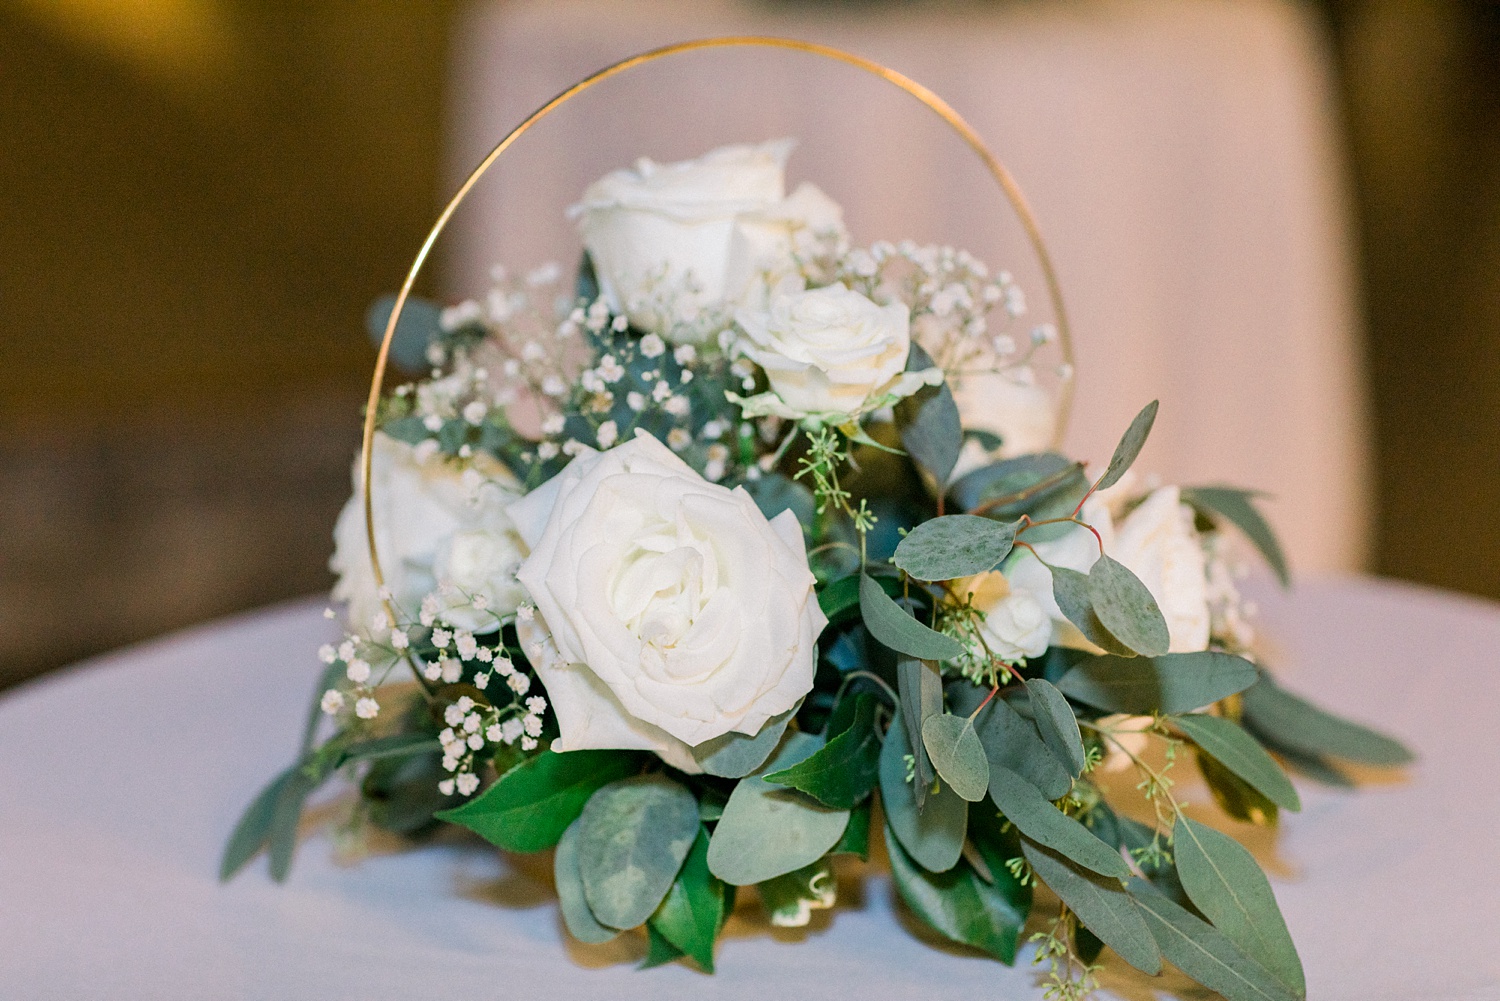 centerpieces with gold details and white flowers for rustic wedding reception at Douglas Manor